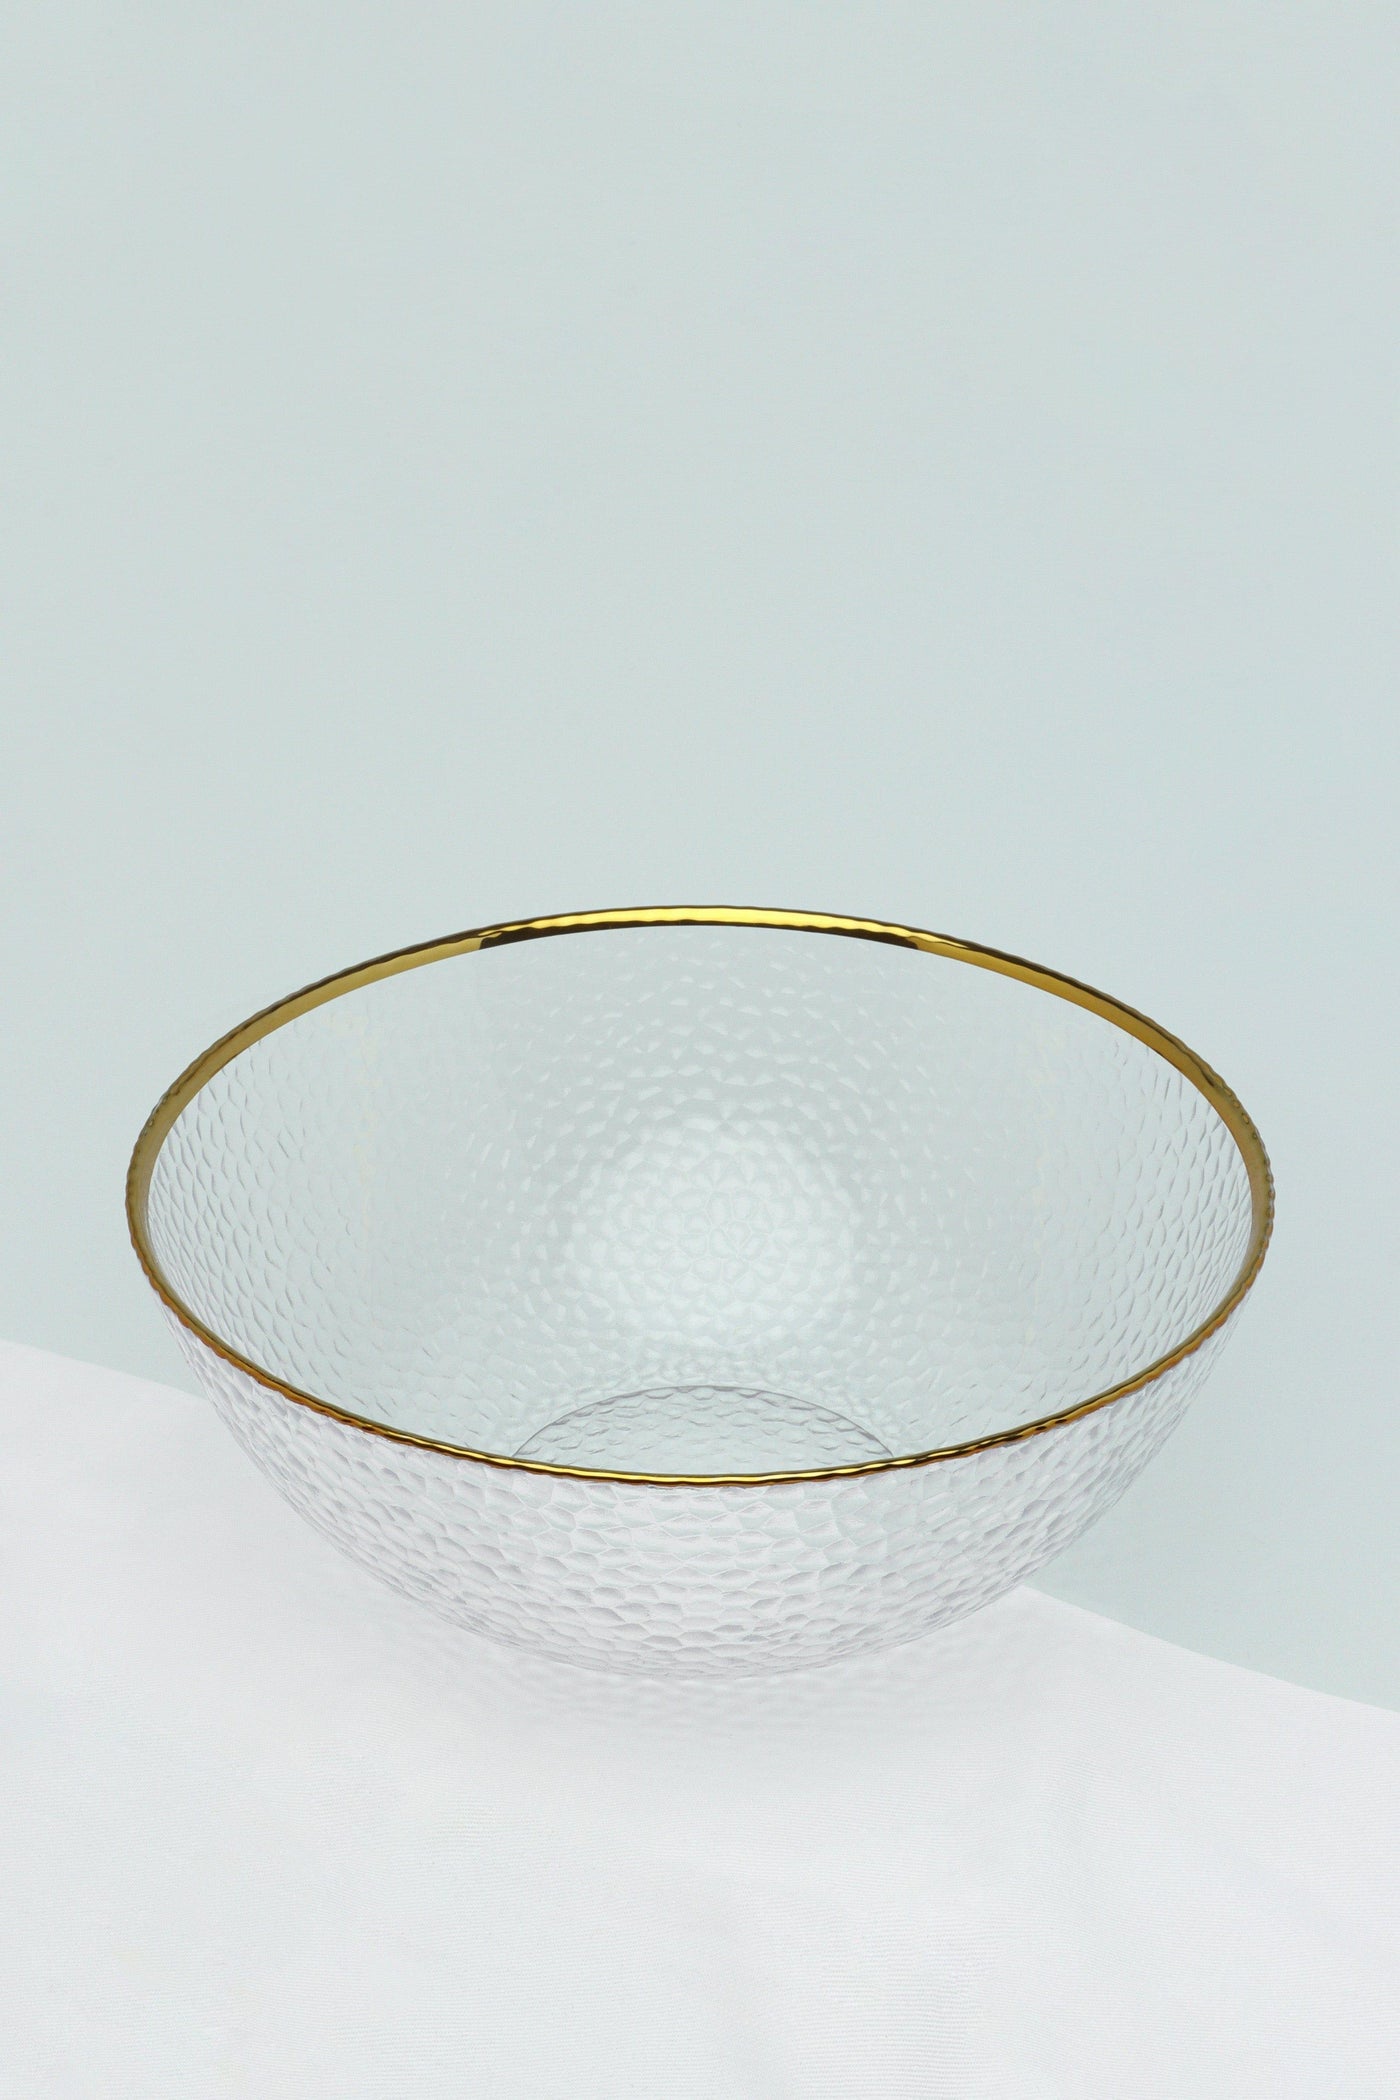 G Decor Bowls Clear Thalia Hammered Textured Glass Gold Rim Large Serving Bowl